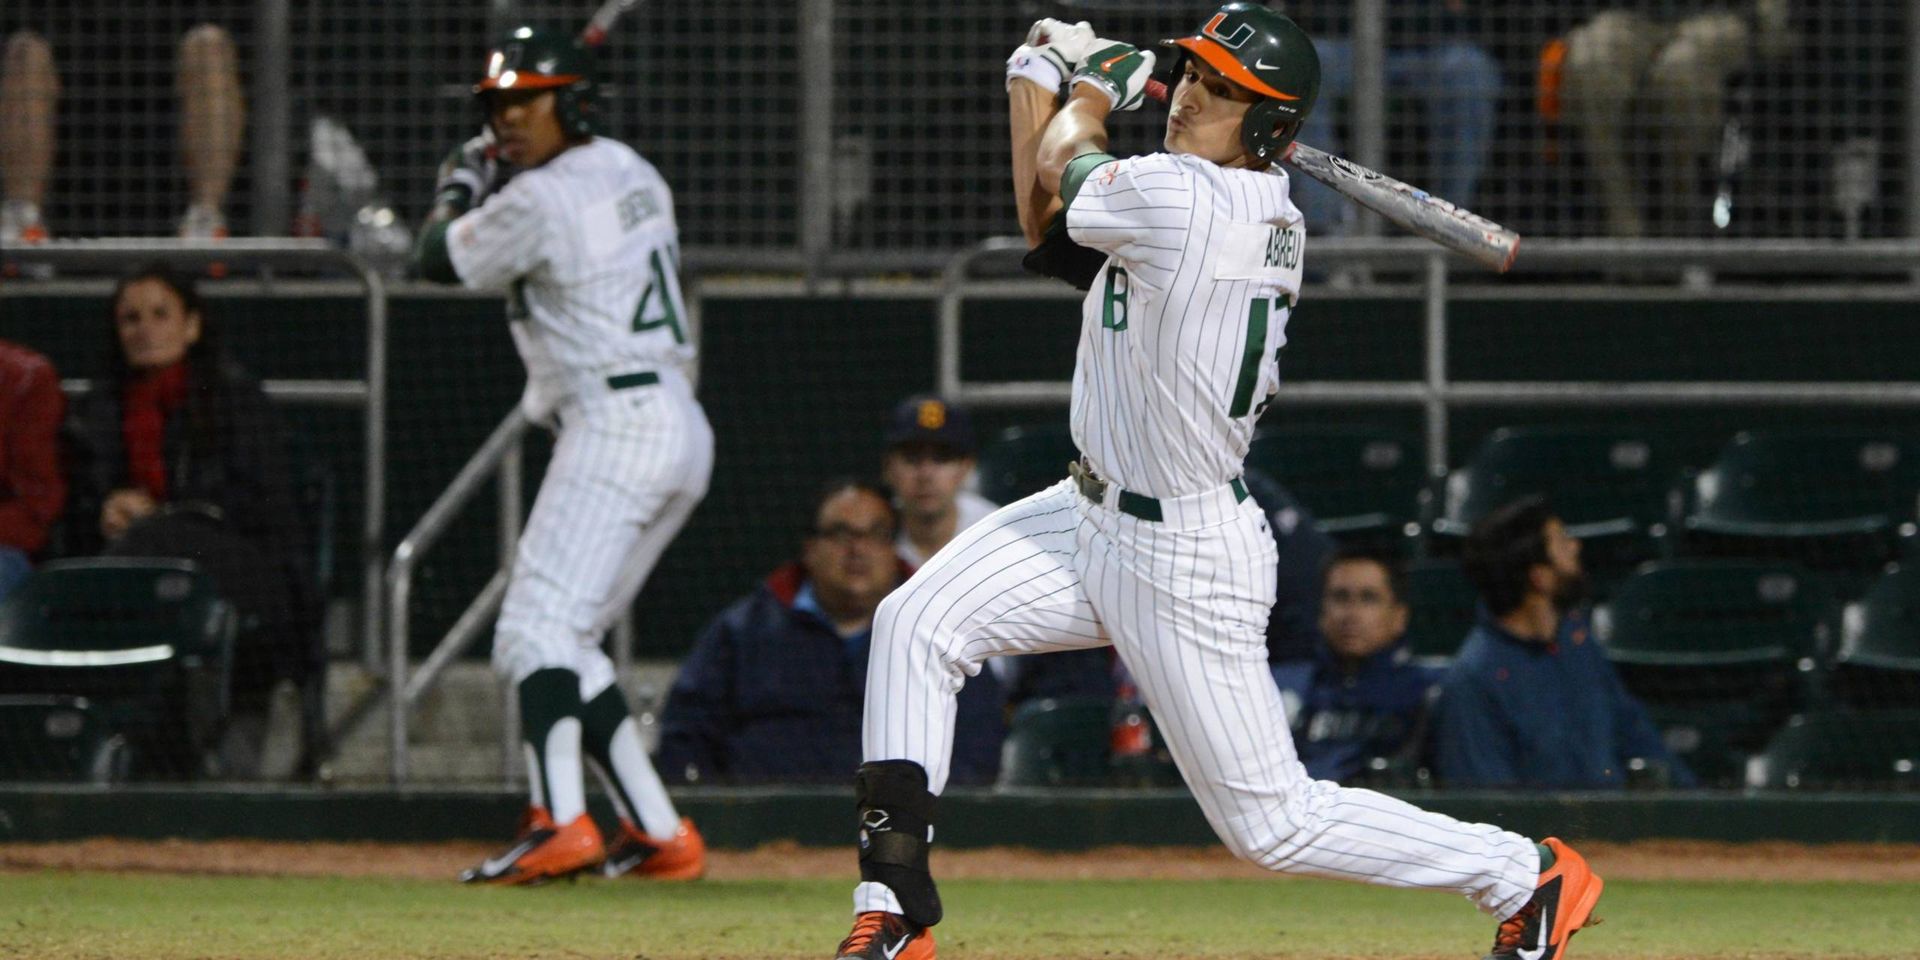 Abreu's Hit Sends Miami to Extra-Innings Win